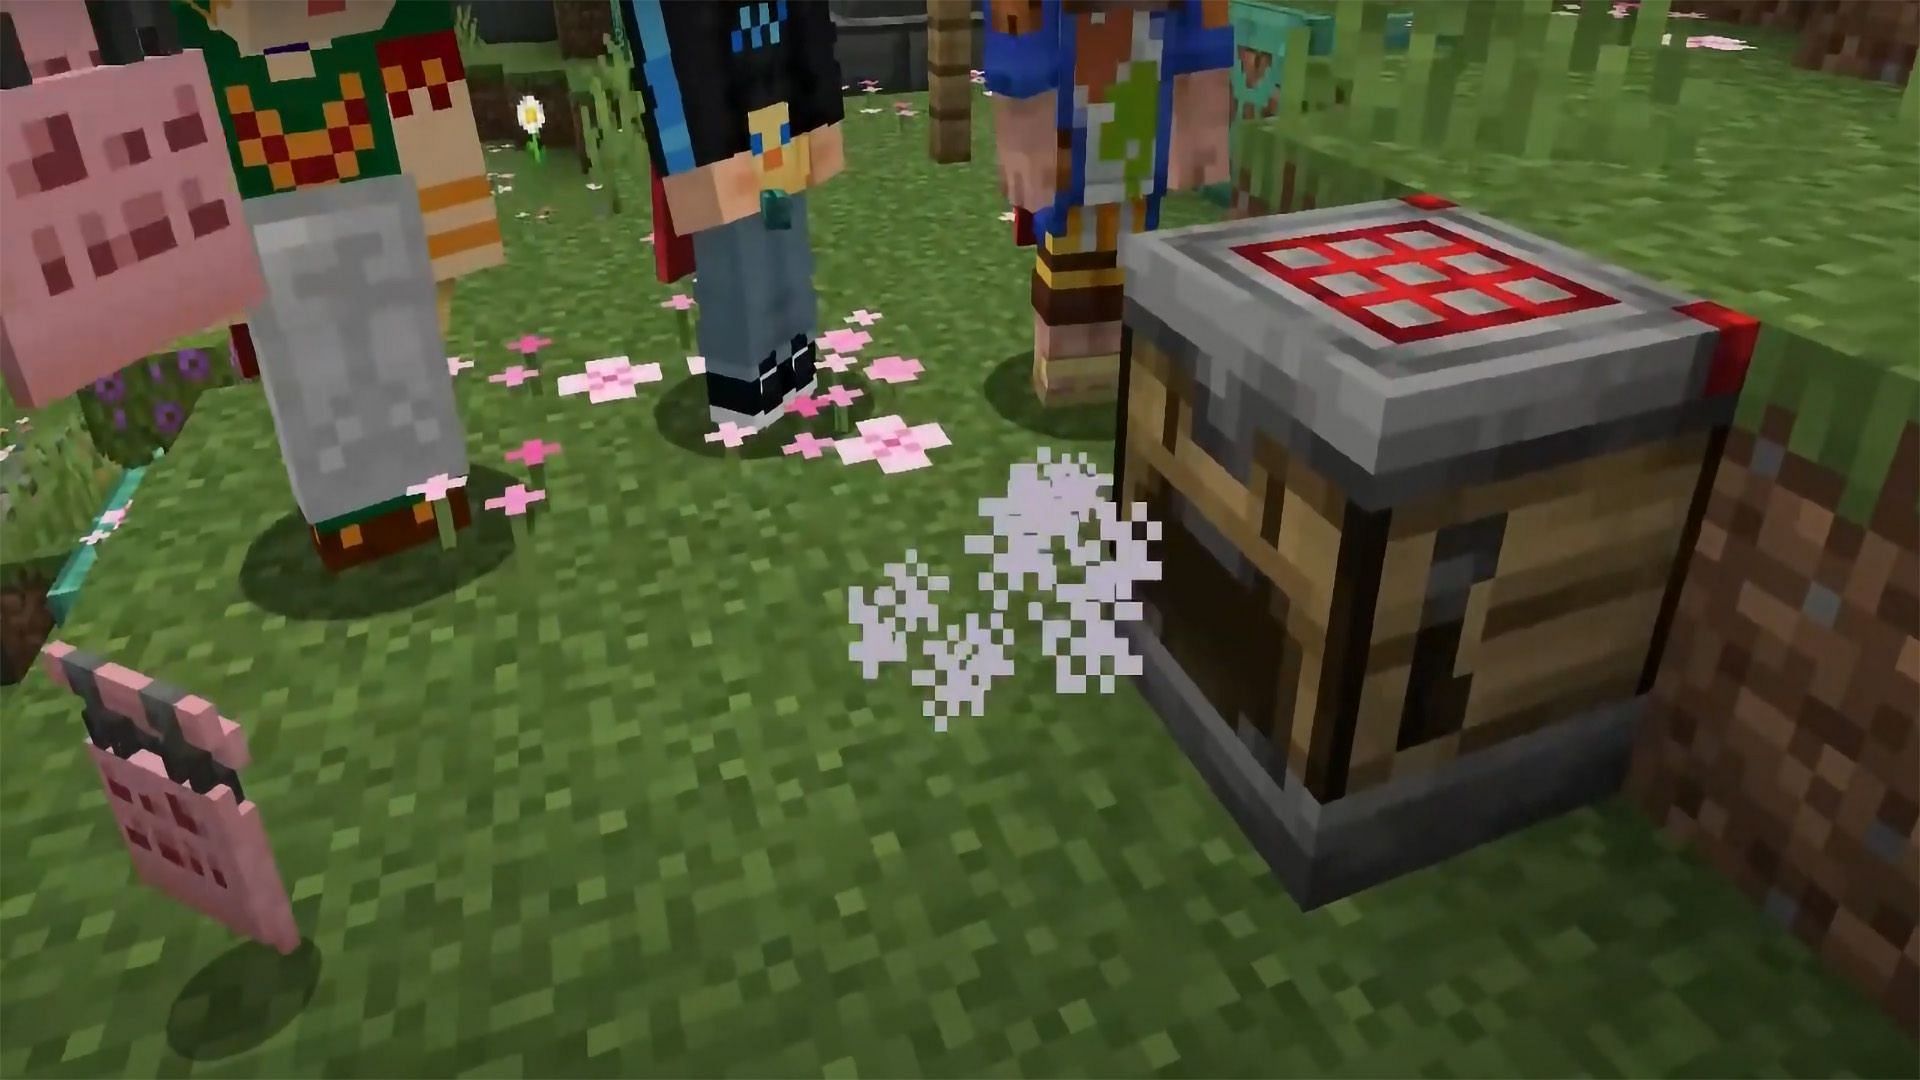 The items will get dispensed out once crafted. (Image via Mojang)